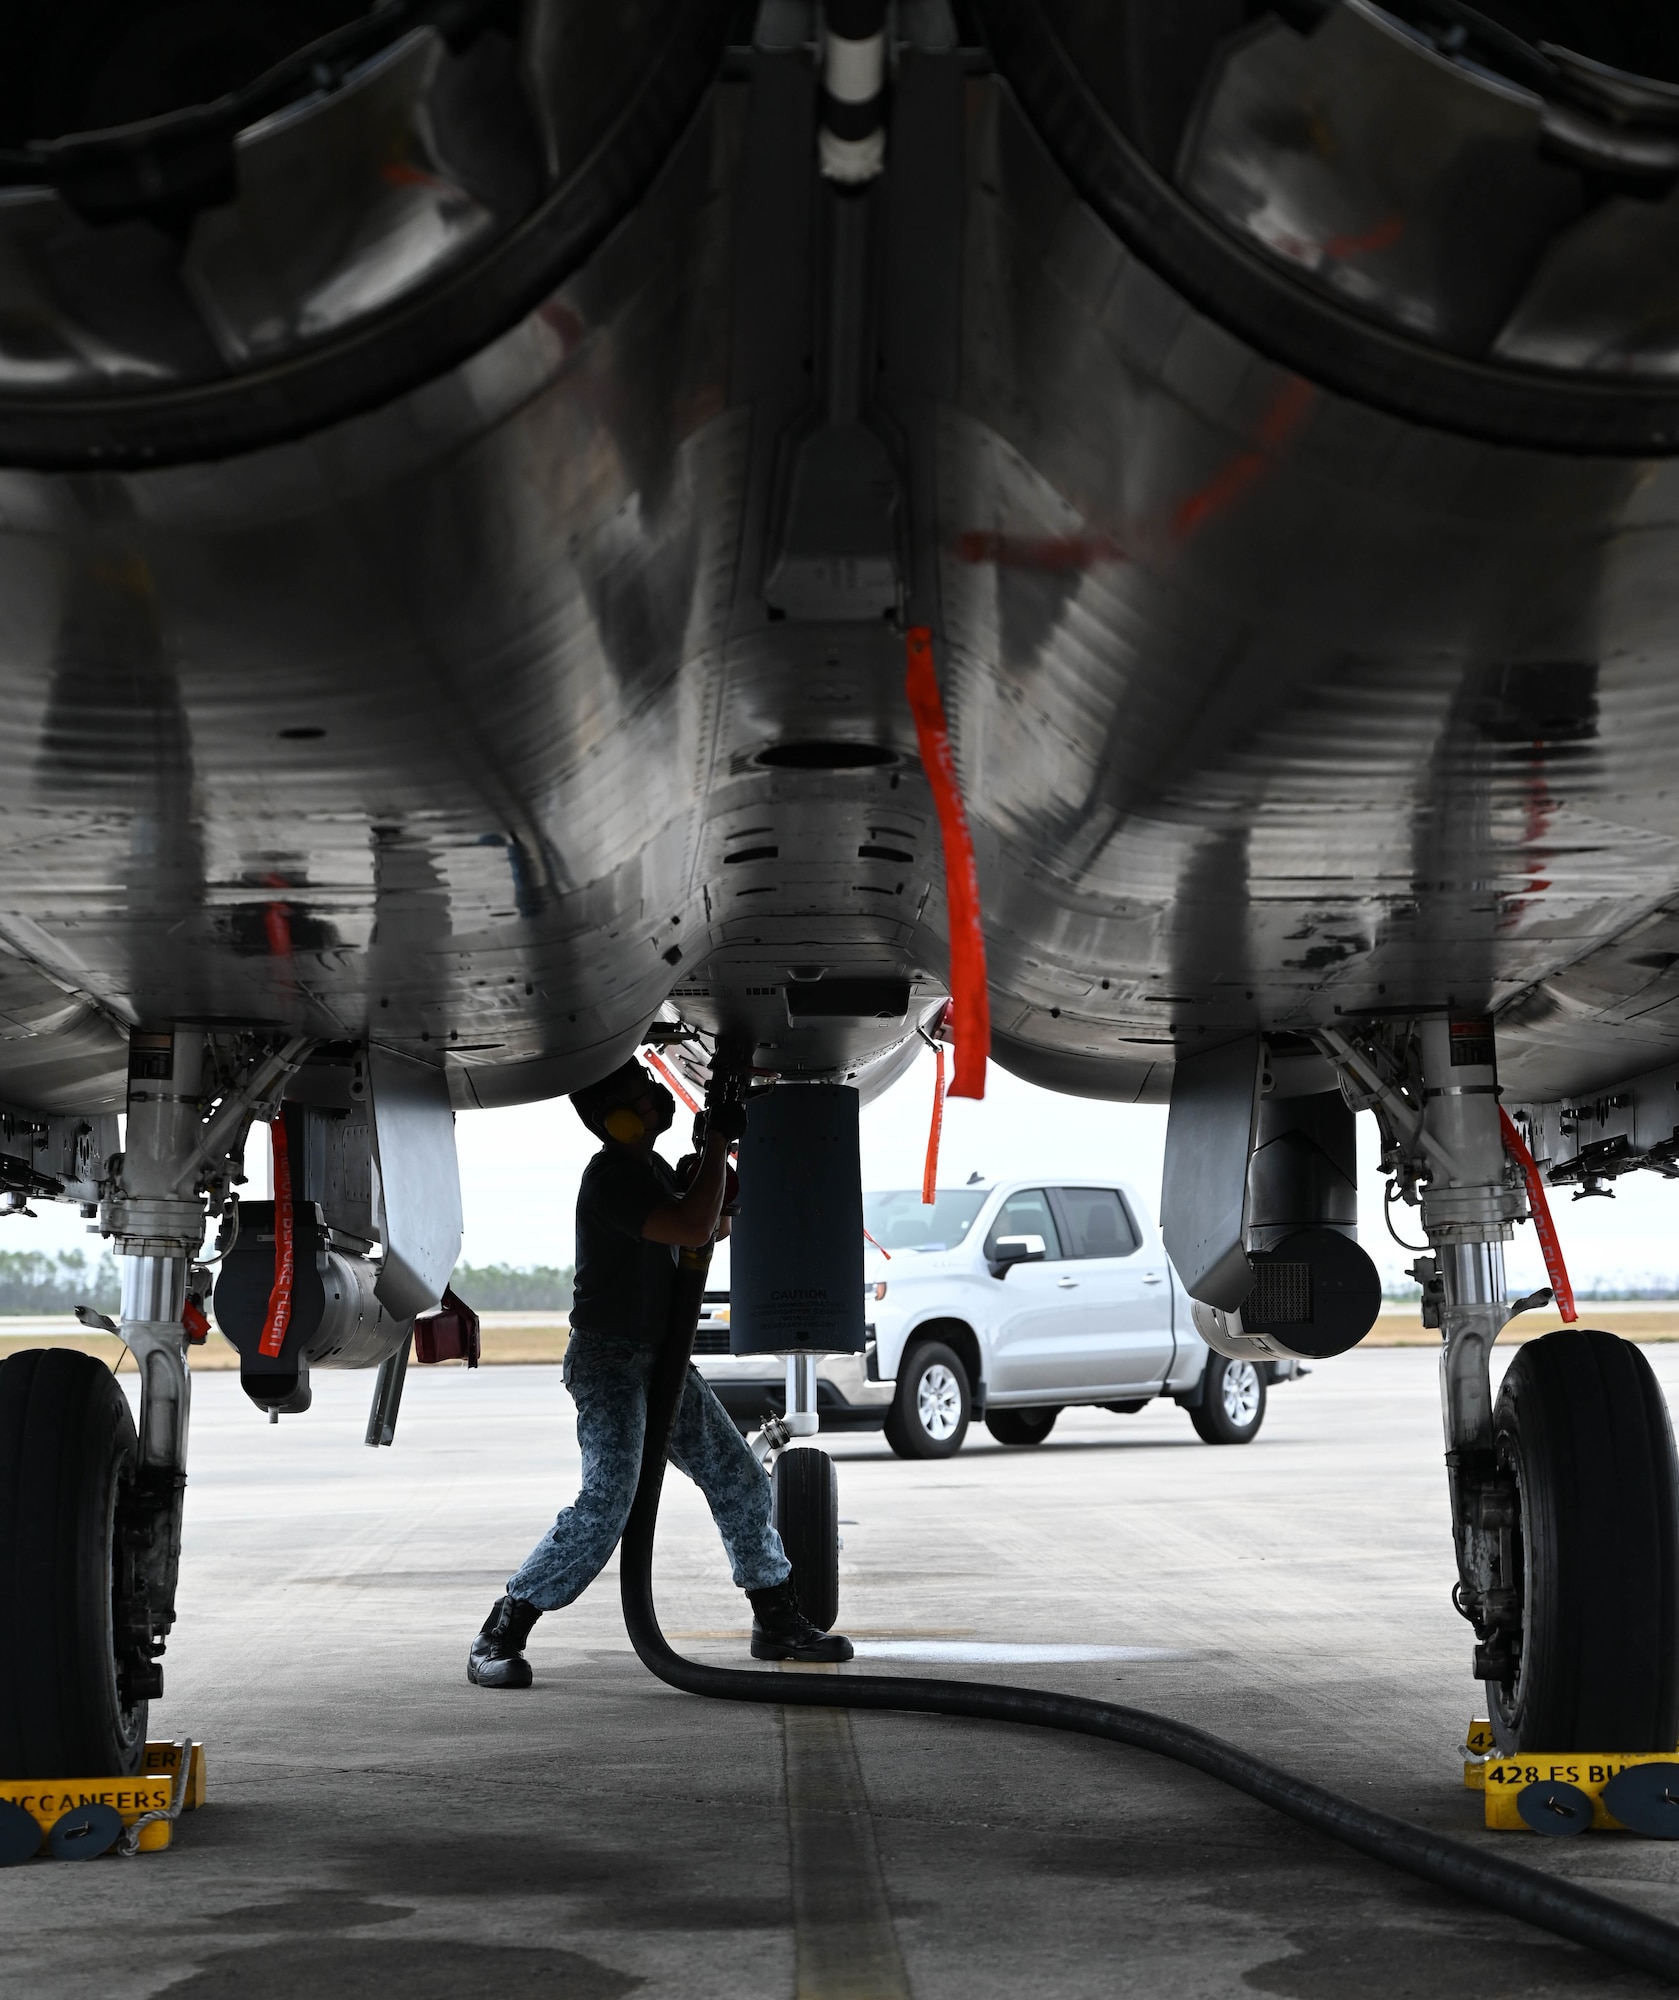 An airman connects a fuel hose to an aircraft